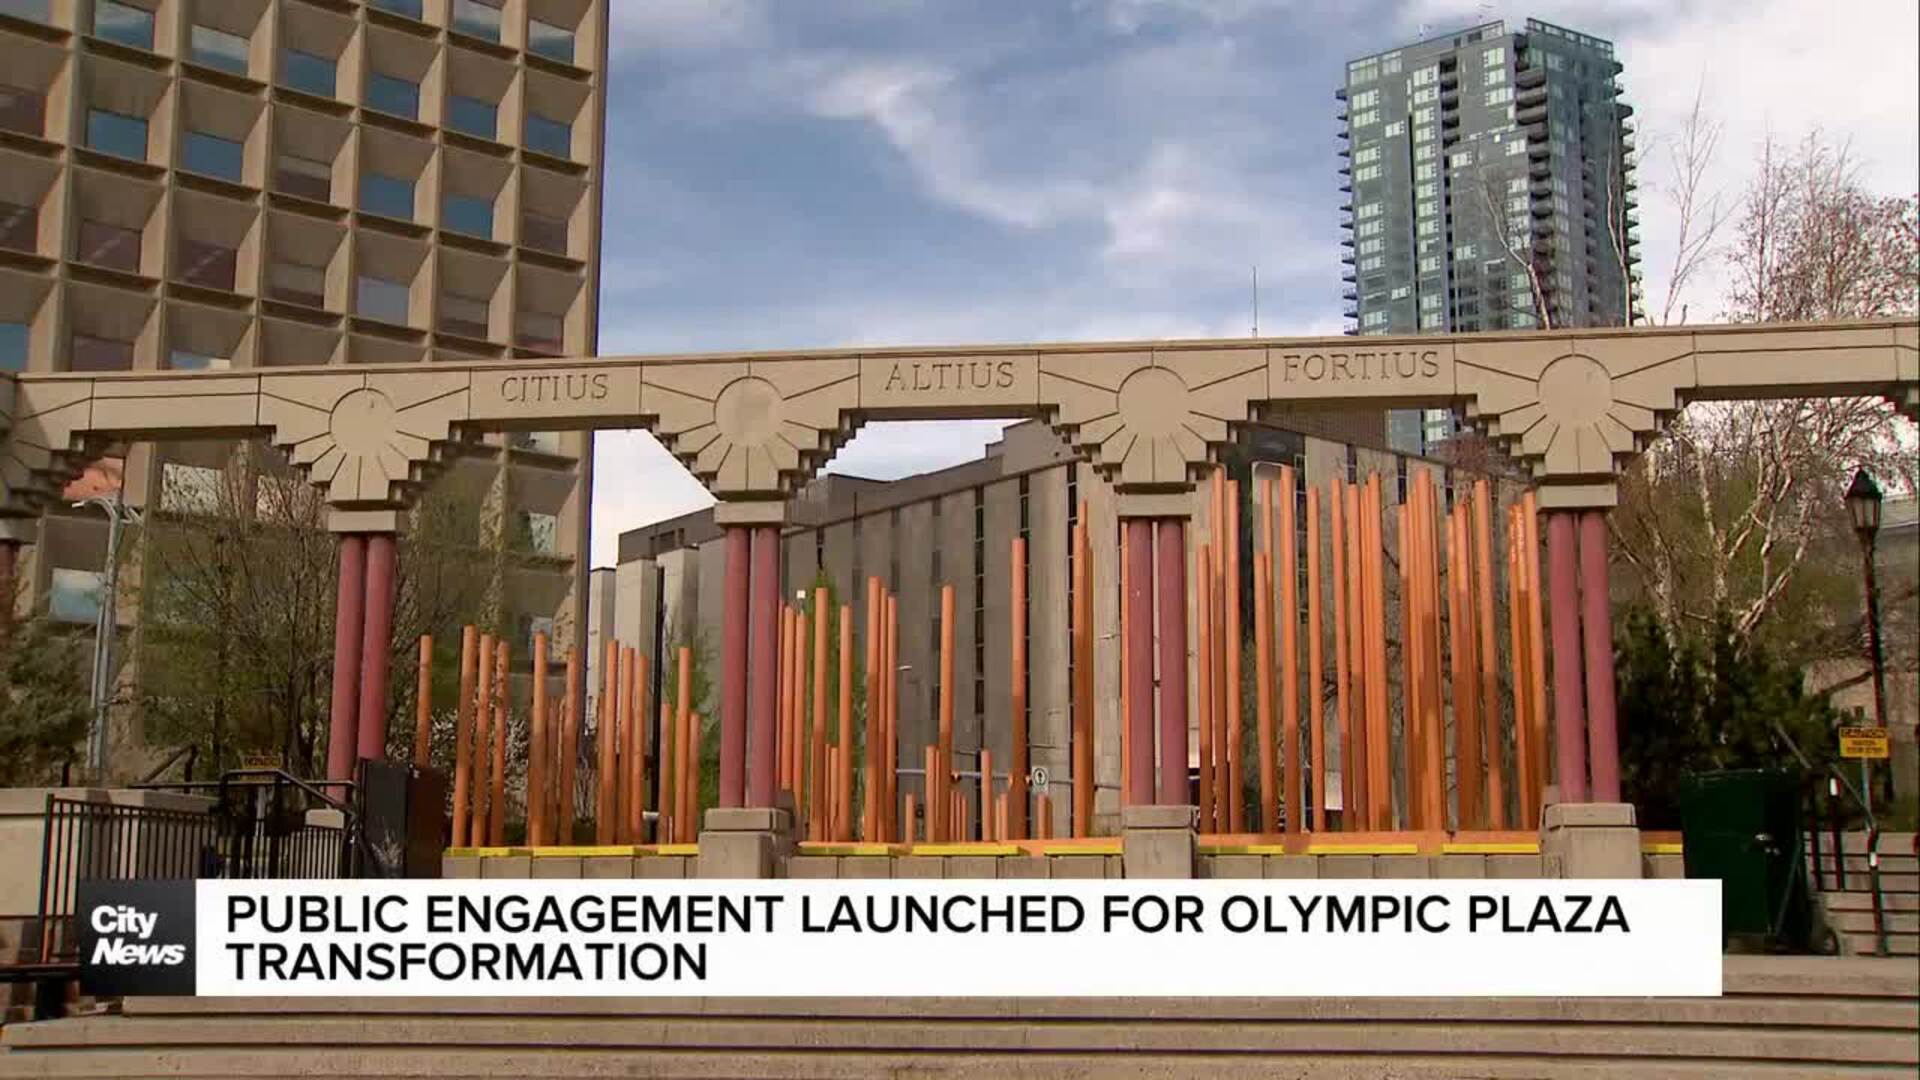 Public engagement launched for Olympic Plaza transformation